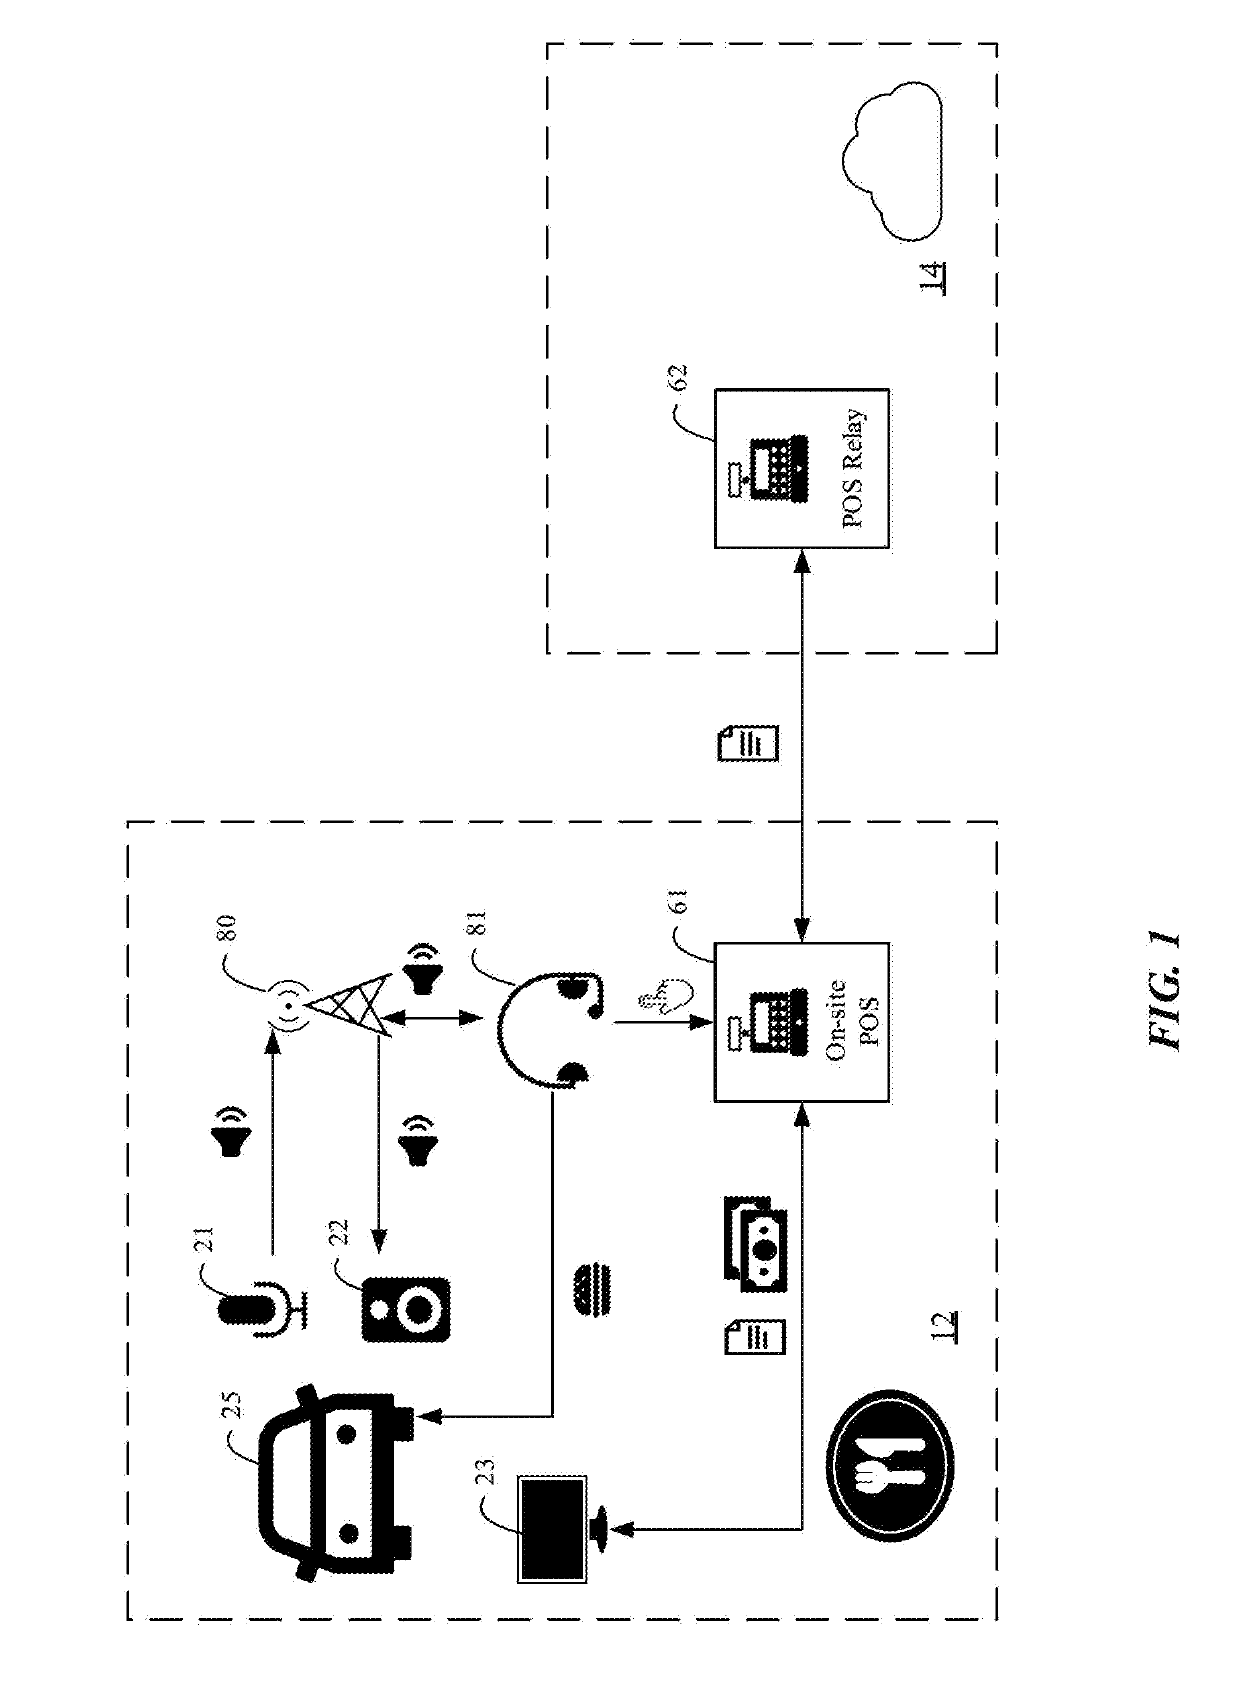 Artificially intelligent order processing system